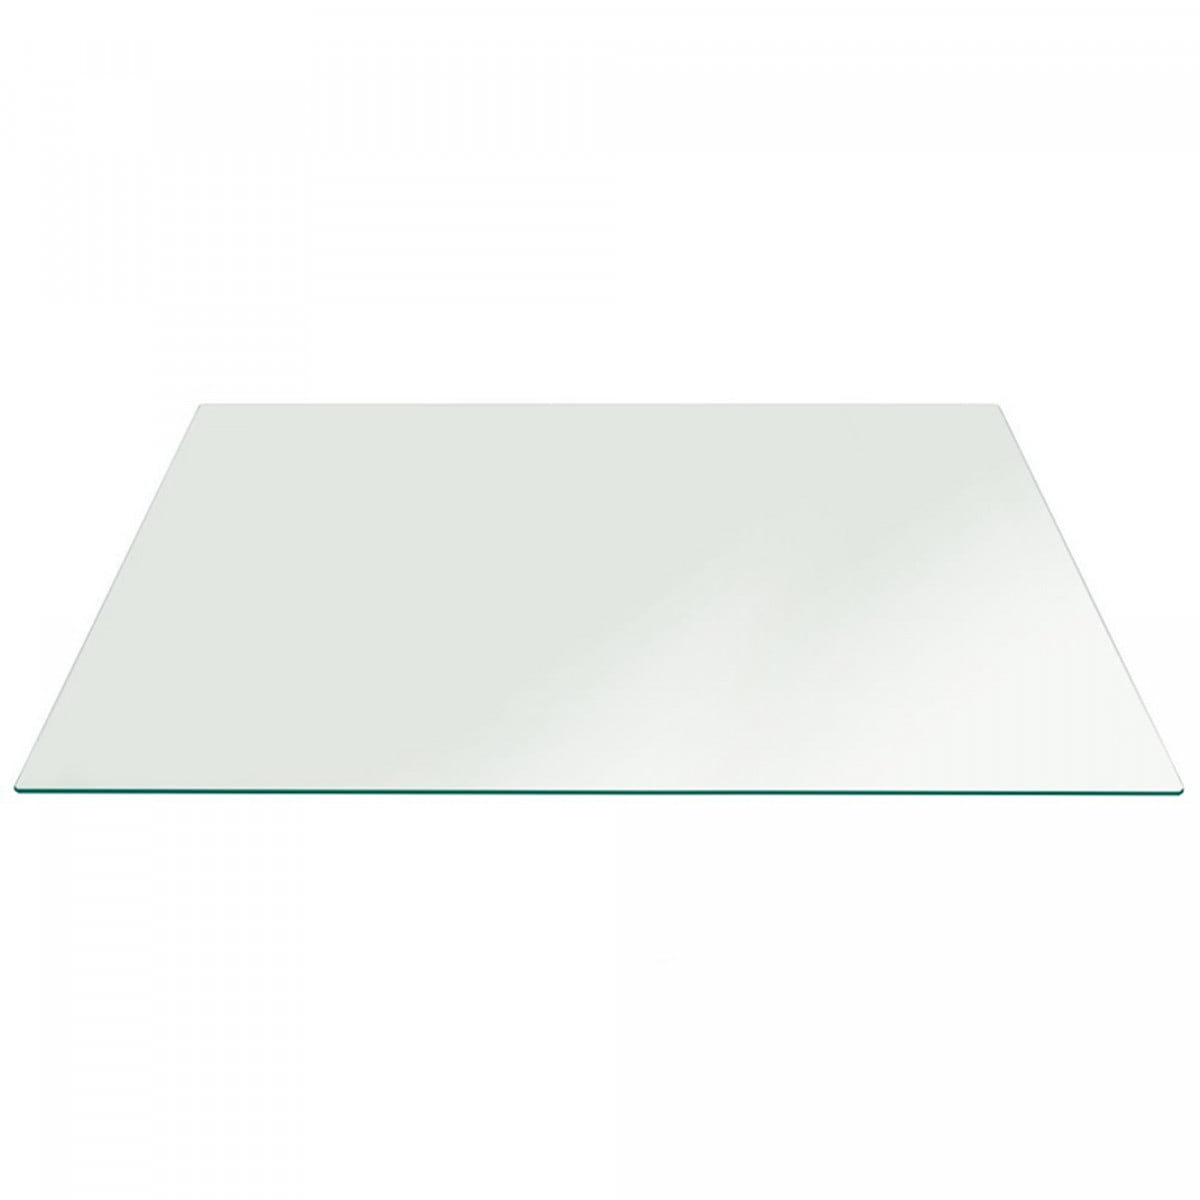 30" x 50" Inch Rectangle Clear Tempered Glass Table Top 1/2" thick Flat edge 